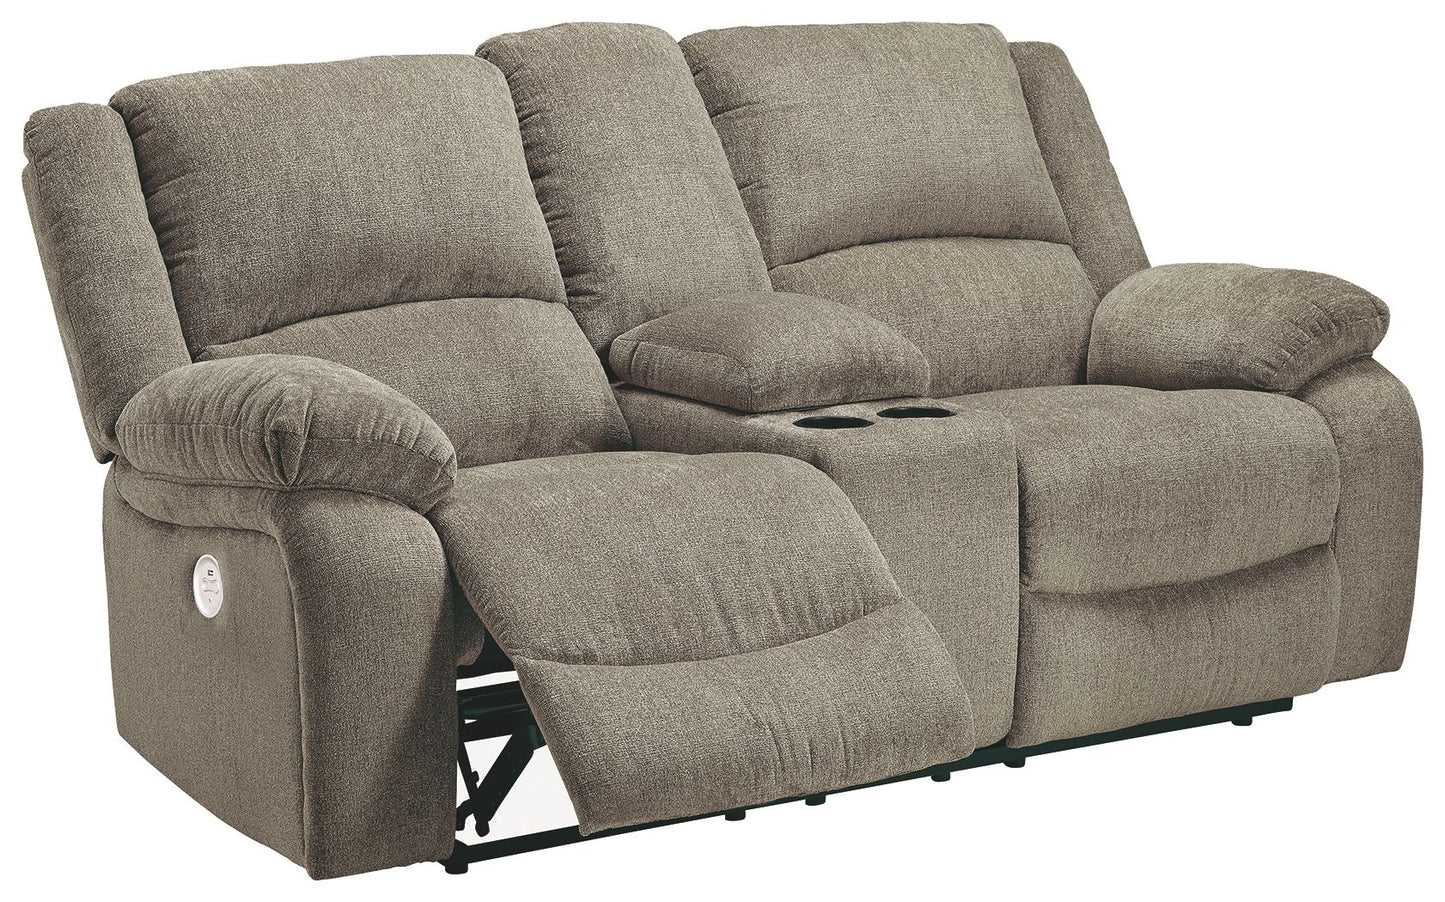 Draycoll - Pewter - Dbl Rec Pwr Loveseat W/Console